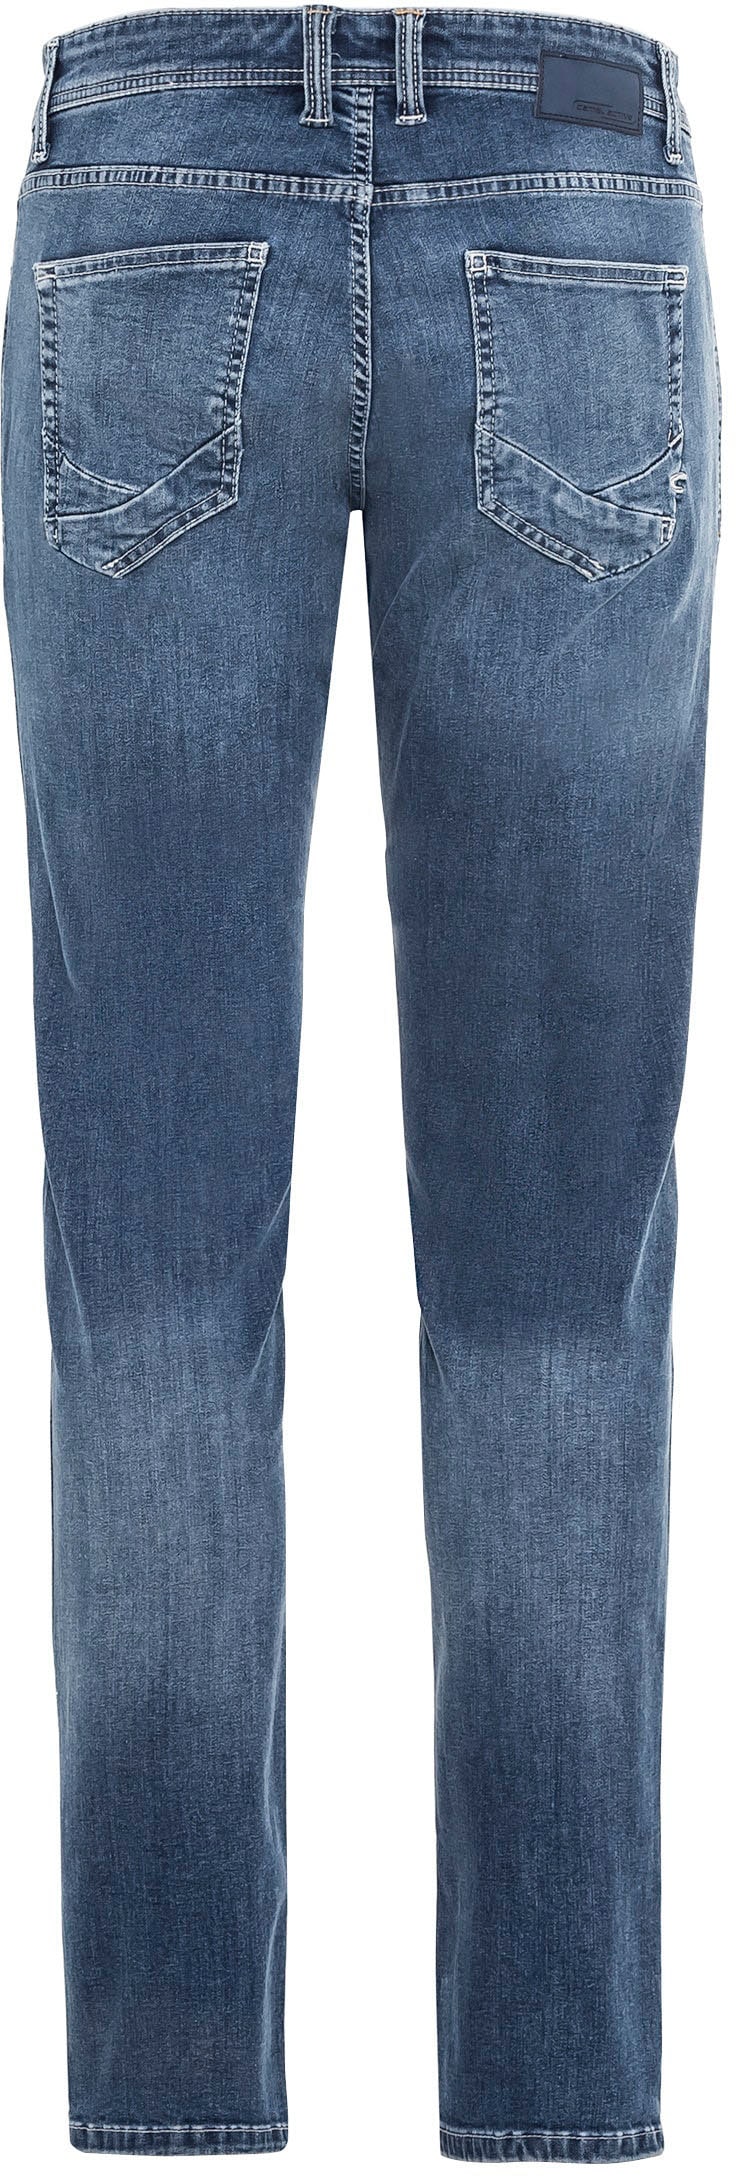 camel active 5-Pocket-Jeans »MADISON«, leichter Used-Look